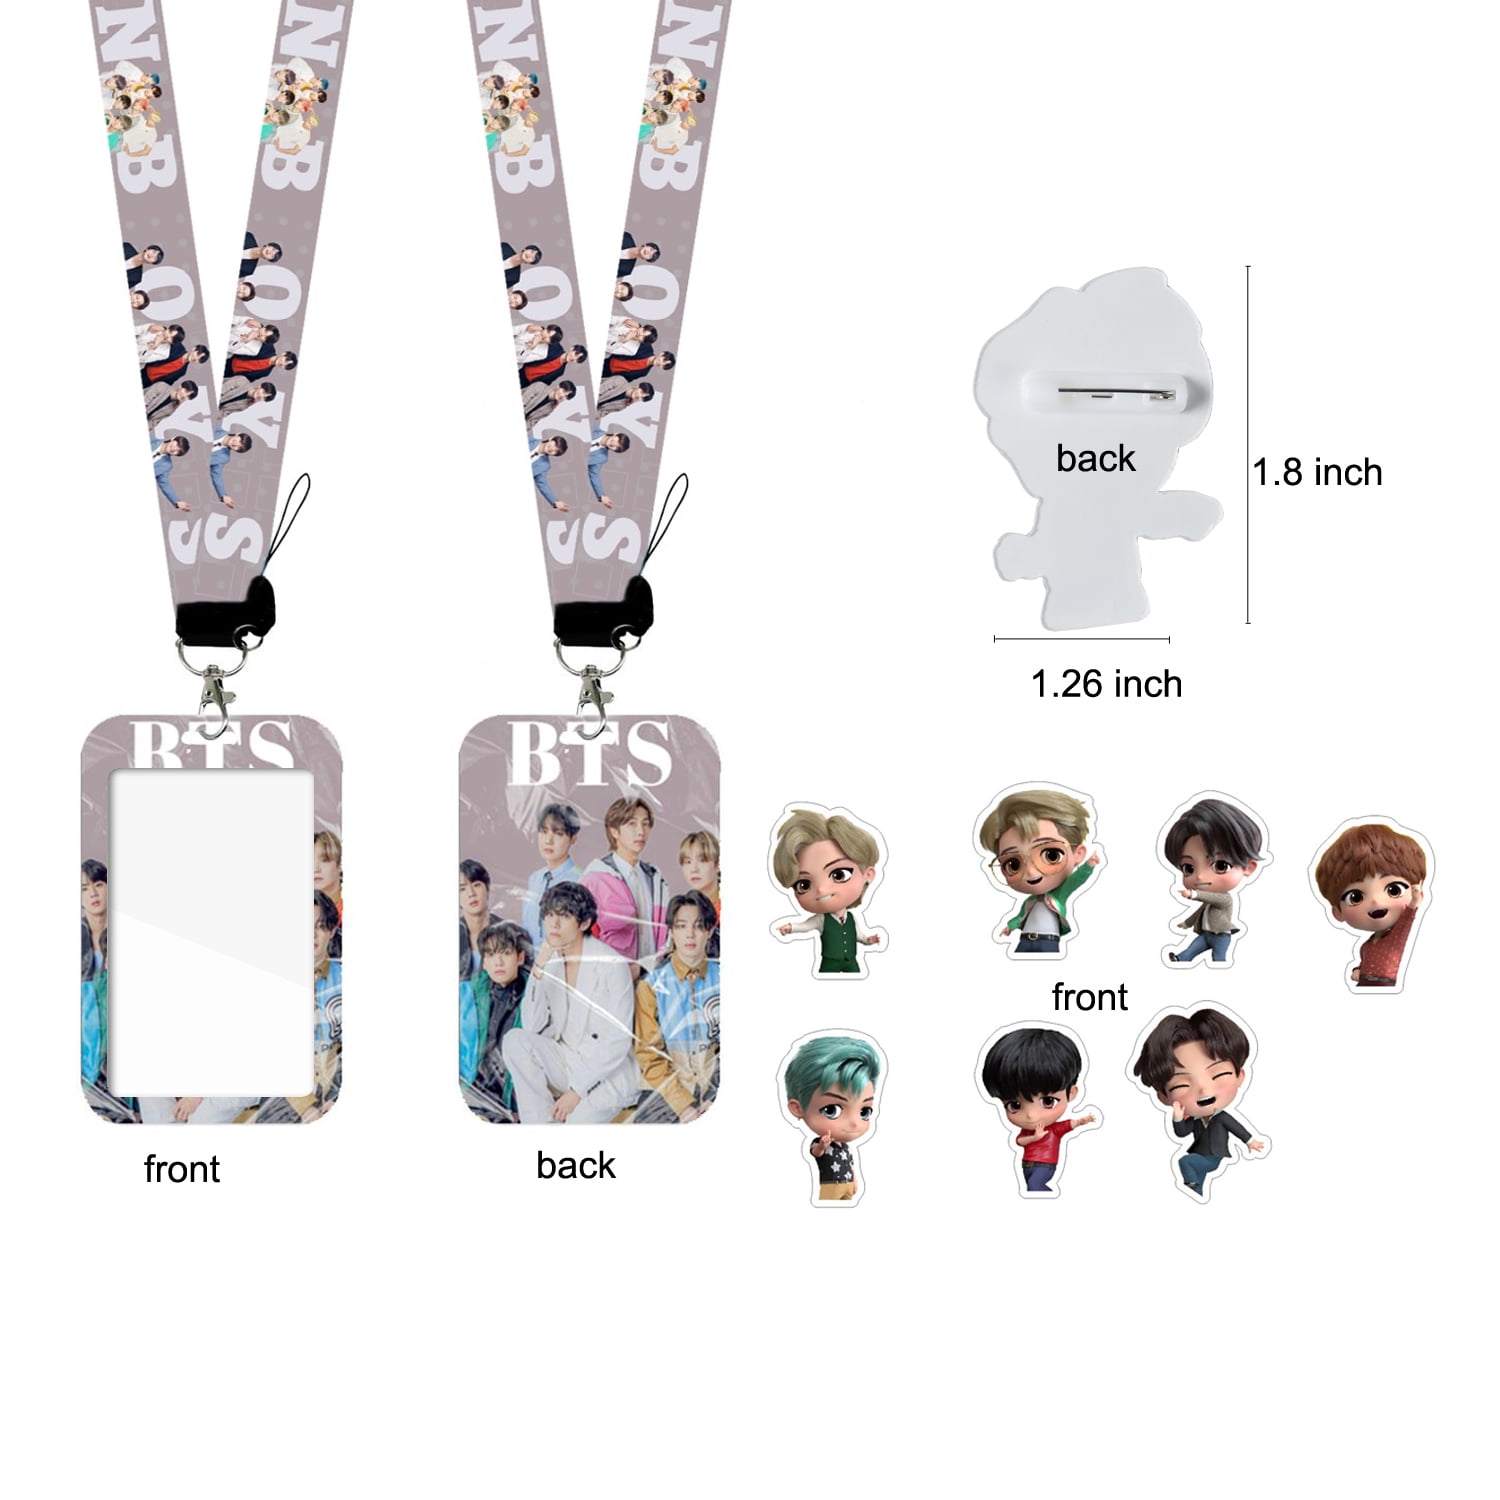 Fans Bangtan Boys Bag Gift Sets Including Drawstring Bag Backpack  Stickers,Lanyard,Face-Masks,Keychain,Necklace,Bracelets,Phone Ring Holder,  Button Pins : : Bags, Wallets and Luggage